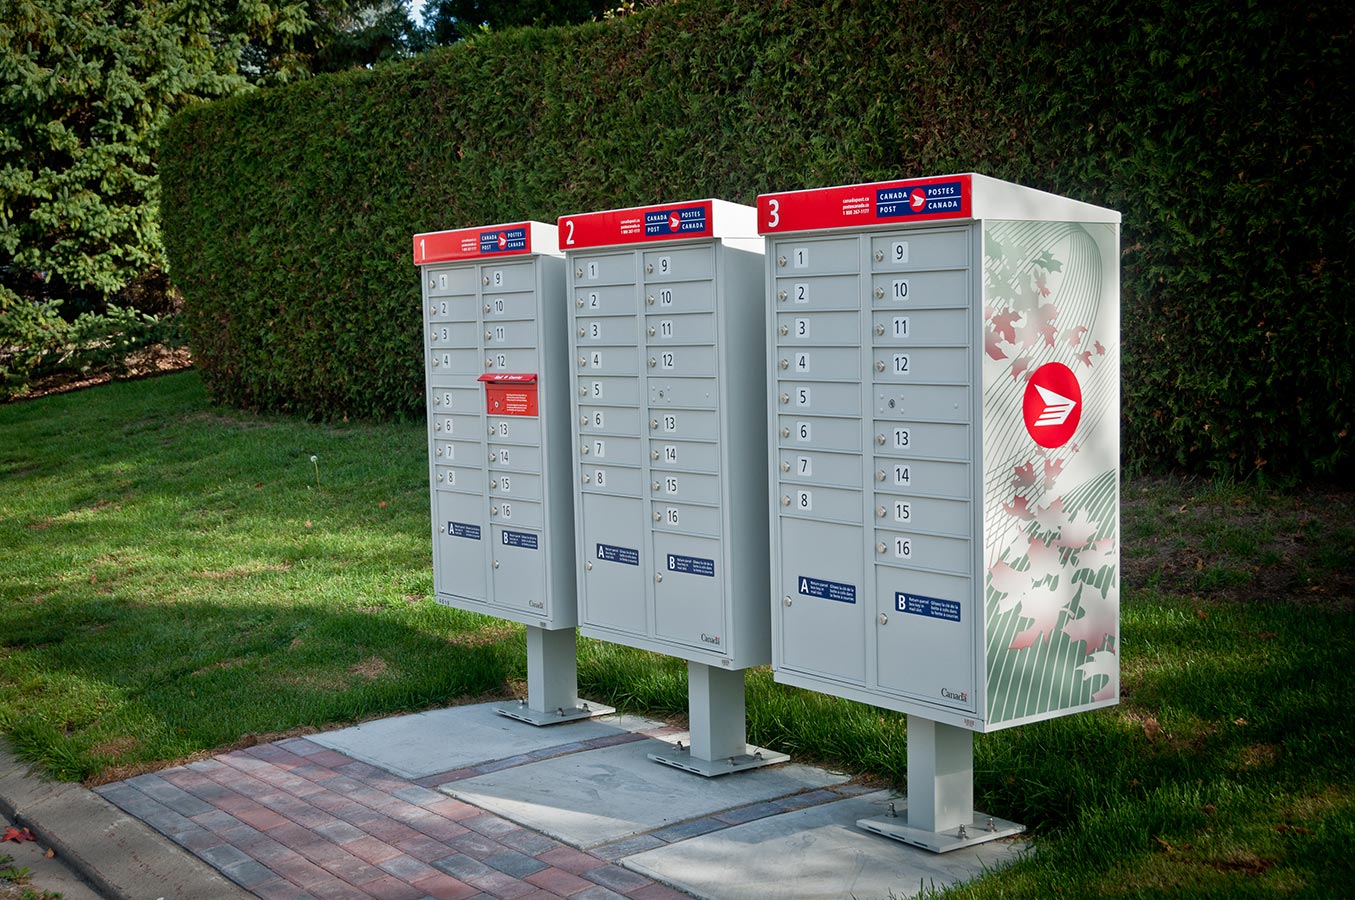 Three community mailboxes side by side in a residential neighbourhood